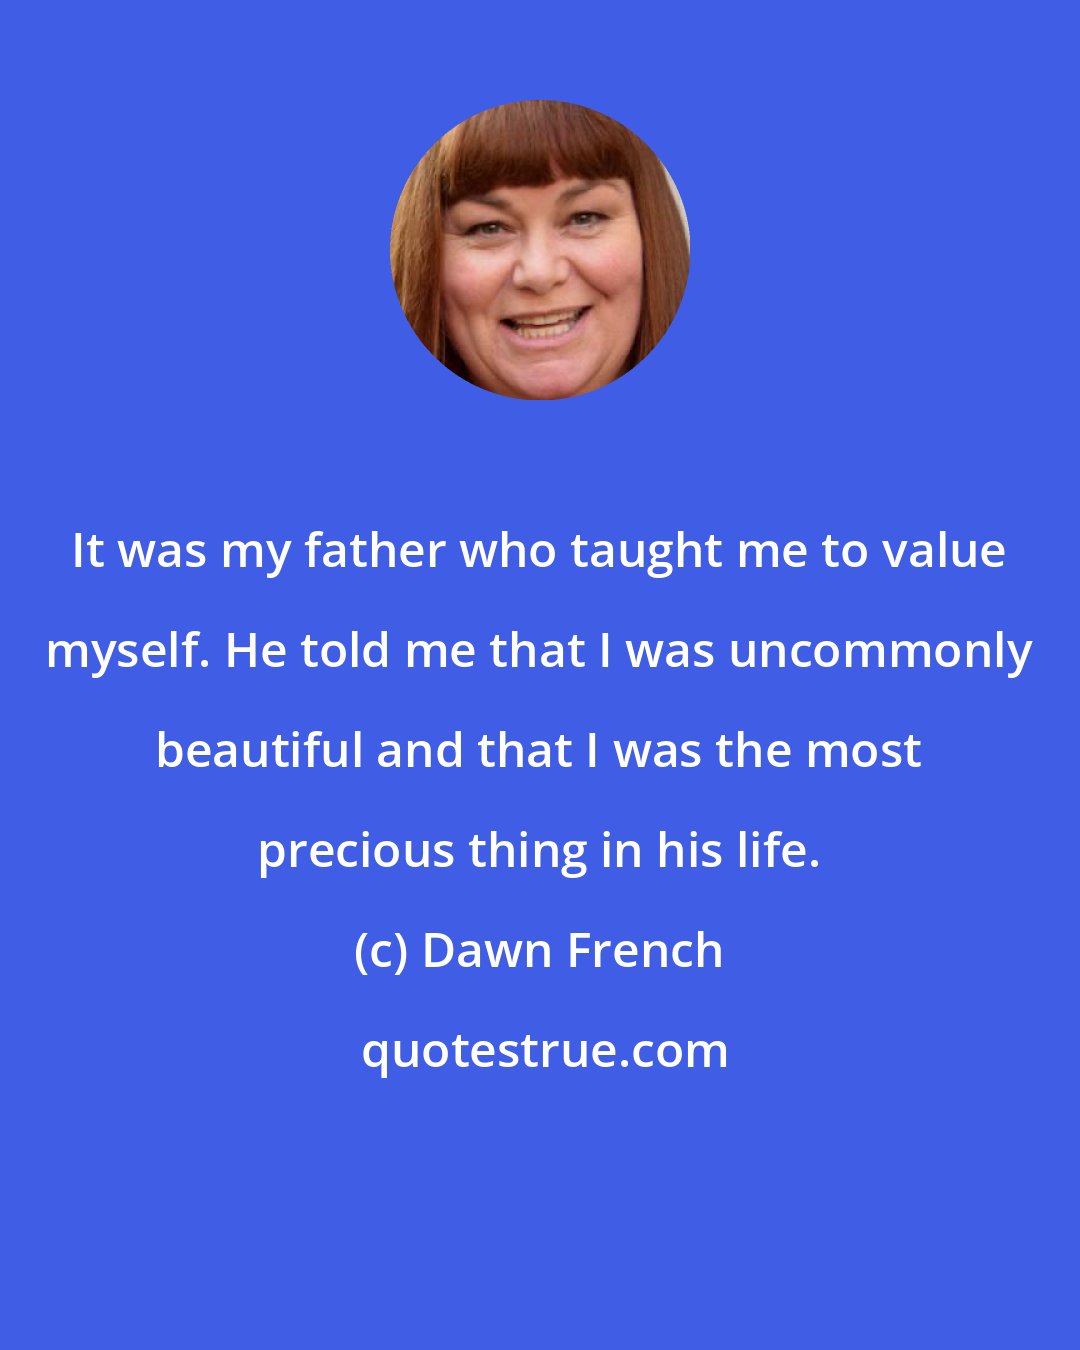 Dawn French: It was my father who taught me to value myself. He told me that I was uncommonly beautiful and that I was the most precious thing in his life.